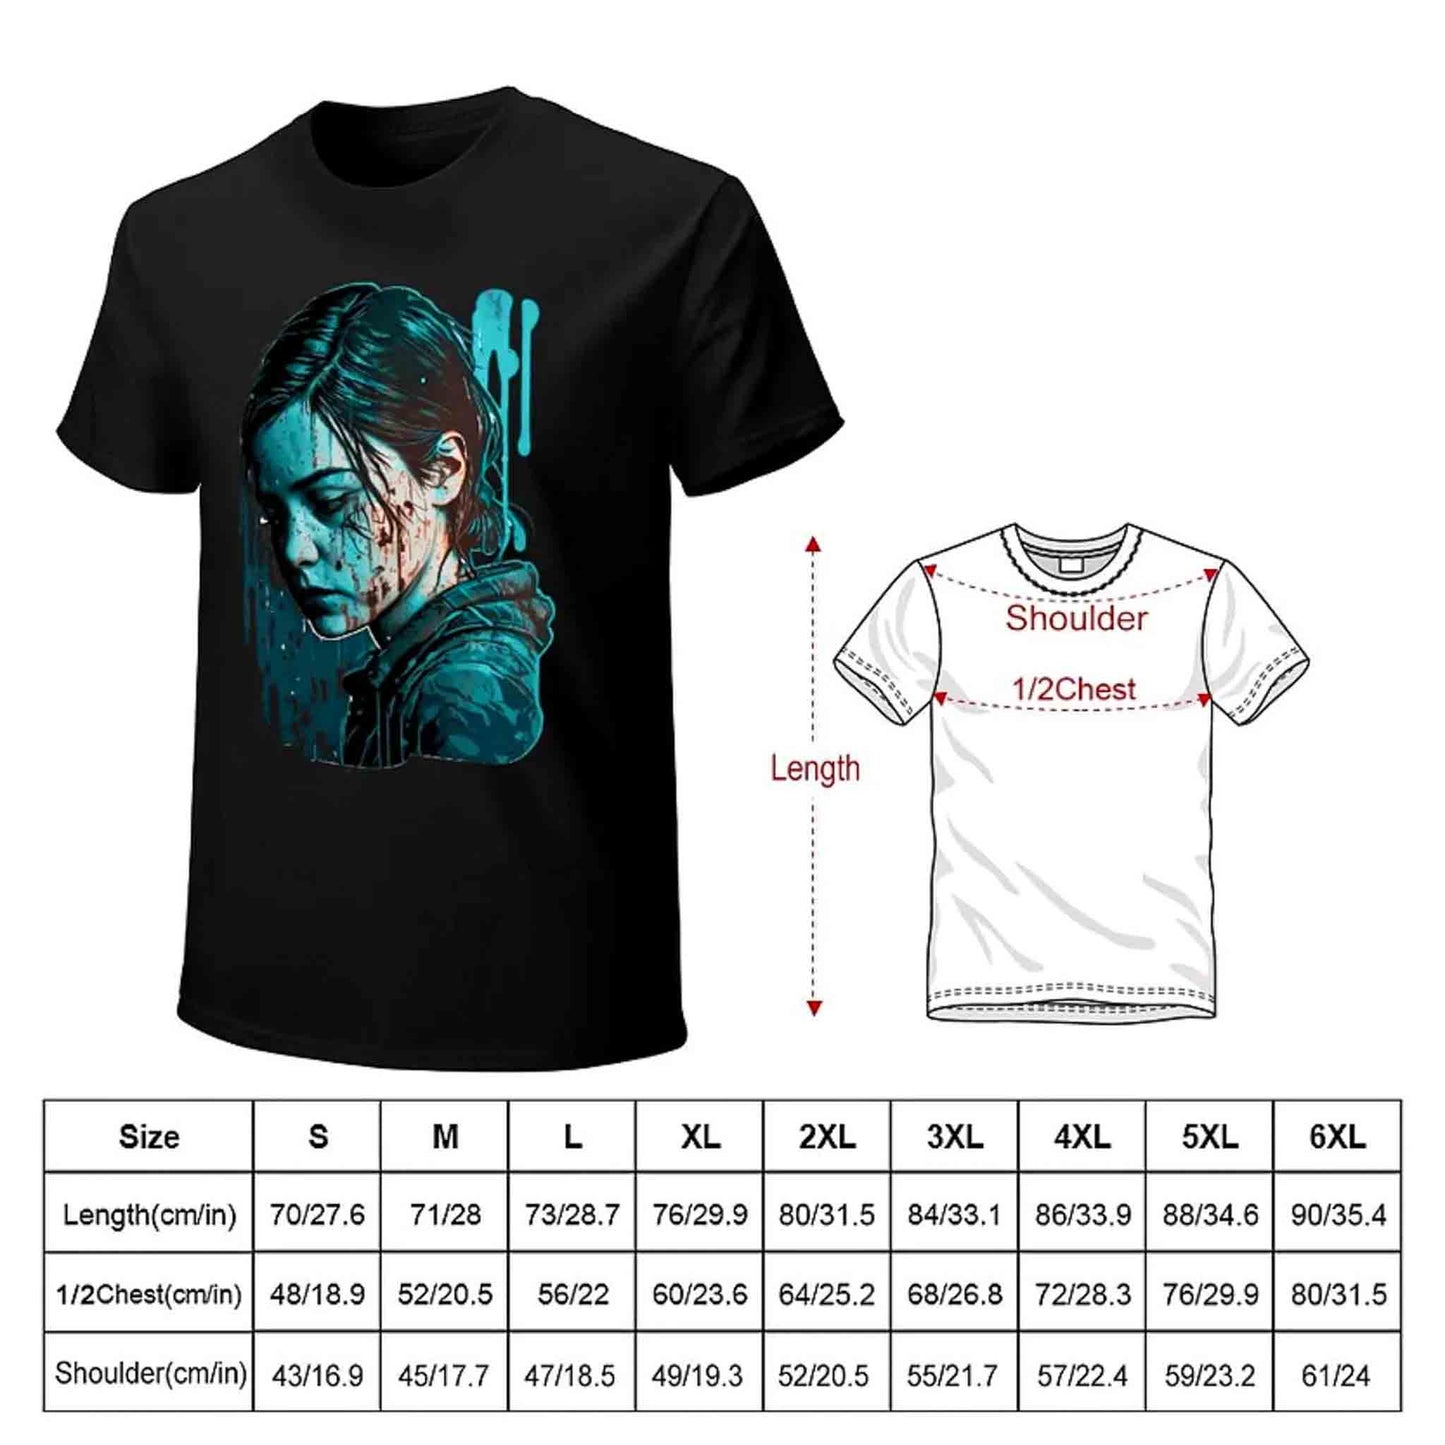 The Last of Us Ellie Artistic Tshirt - Available at 2Fast2See.co